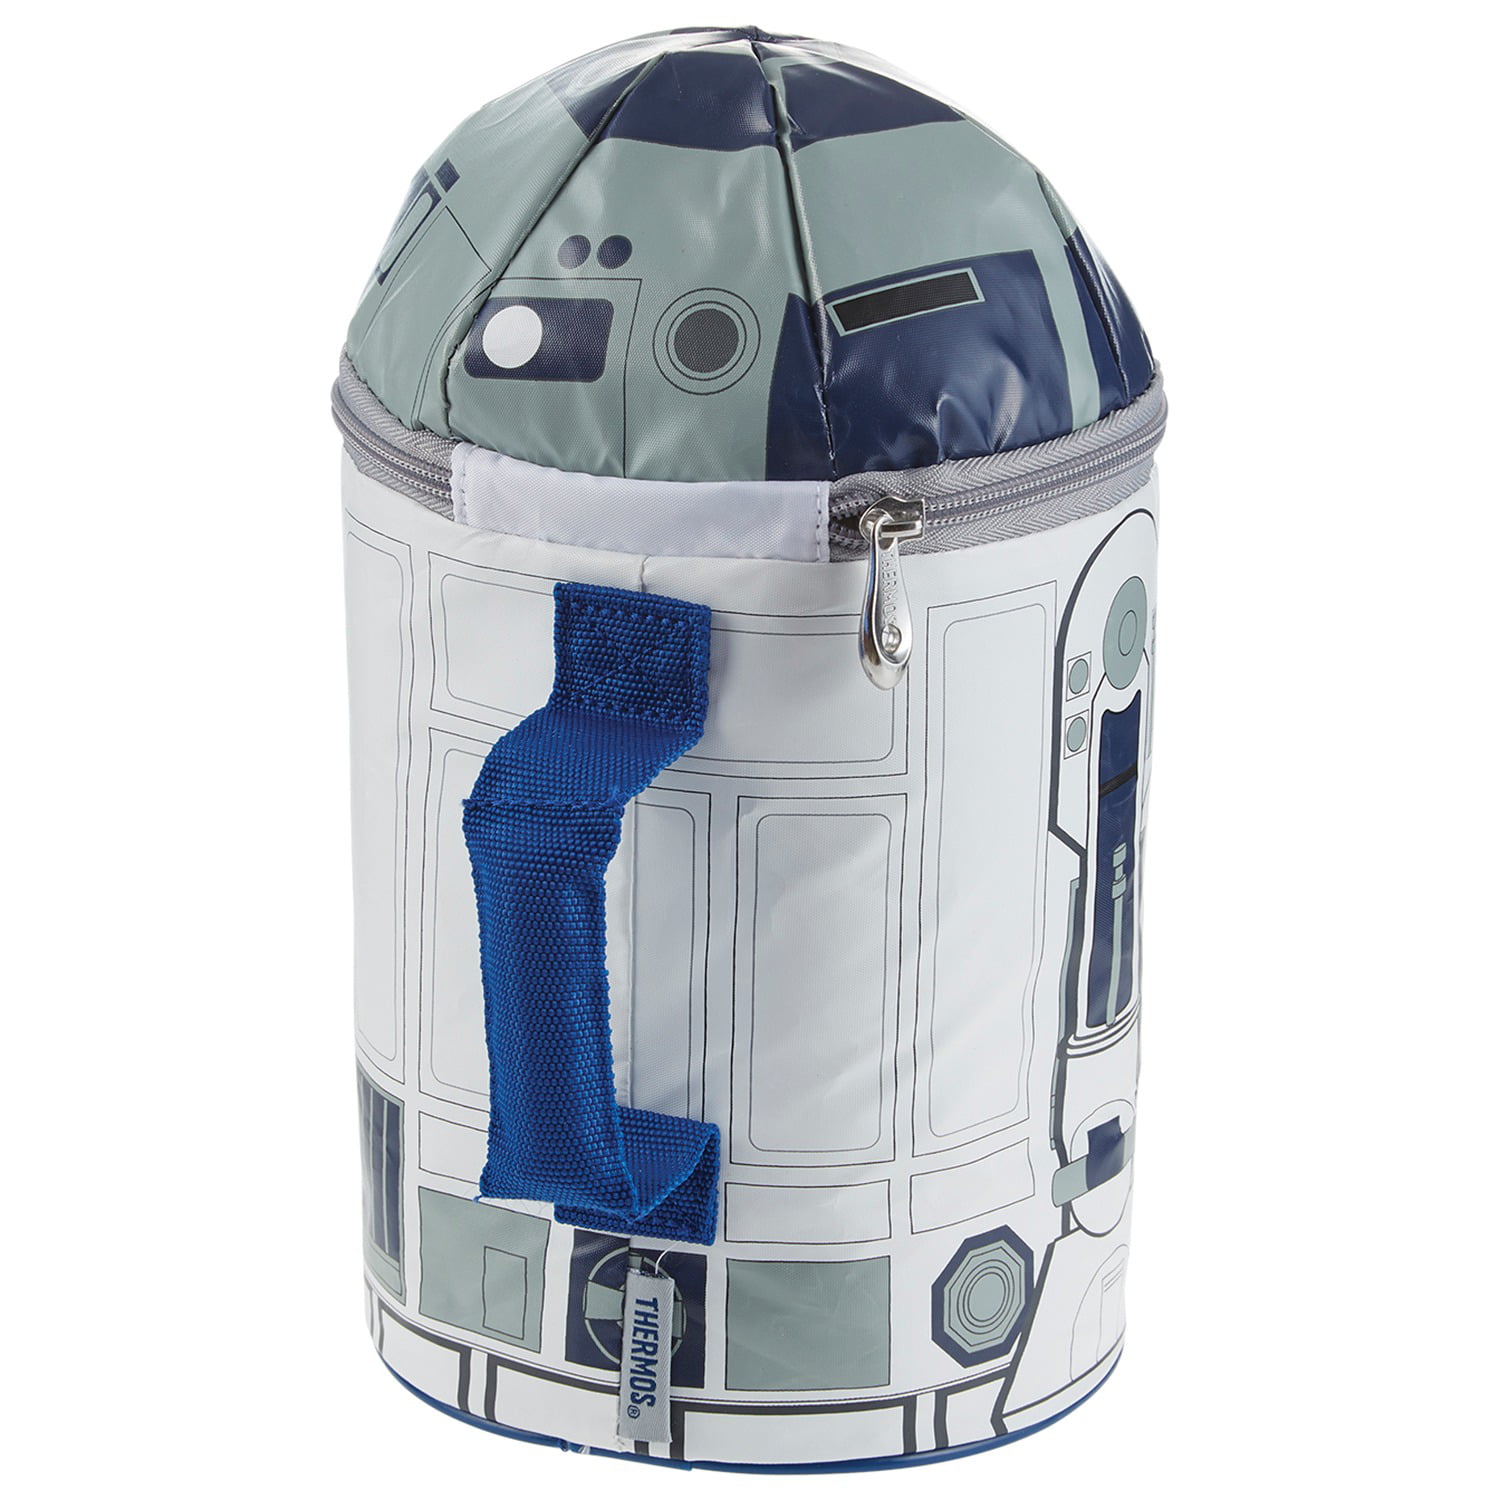 Thermos K43415006 Metal Lunch Box, Star Wars